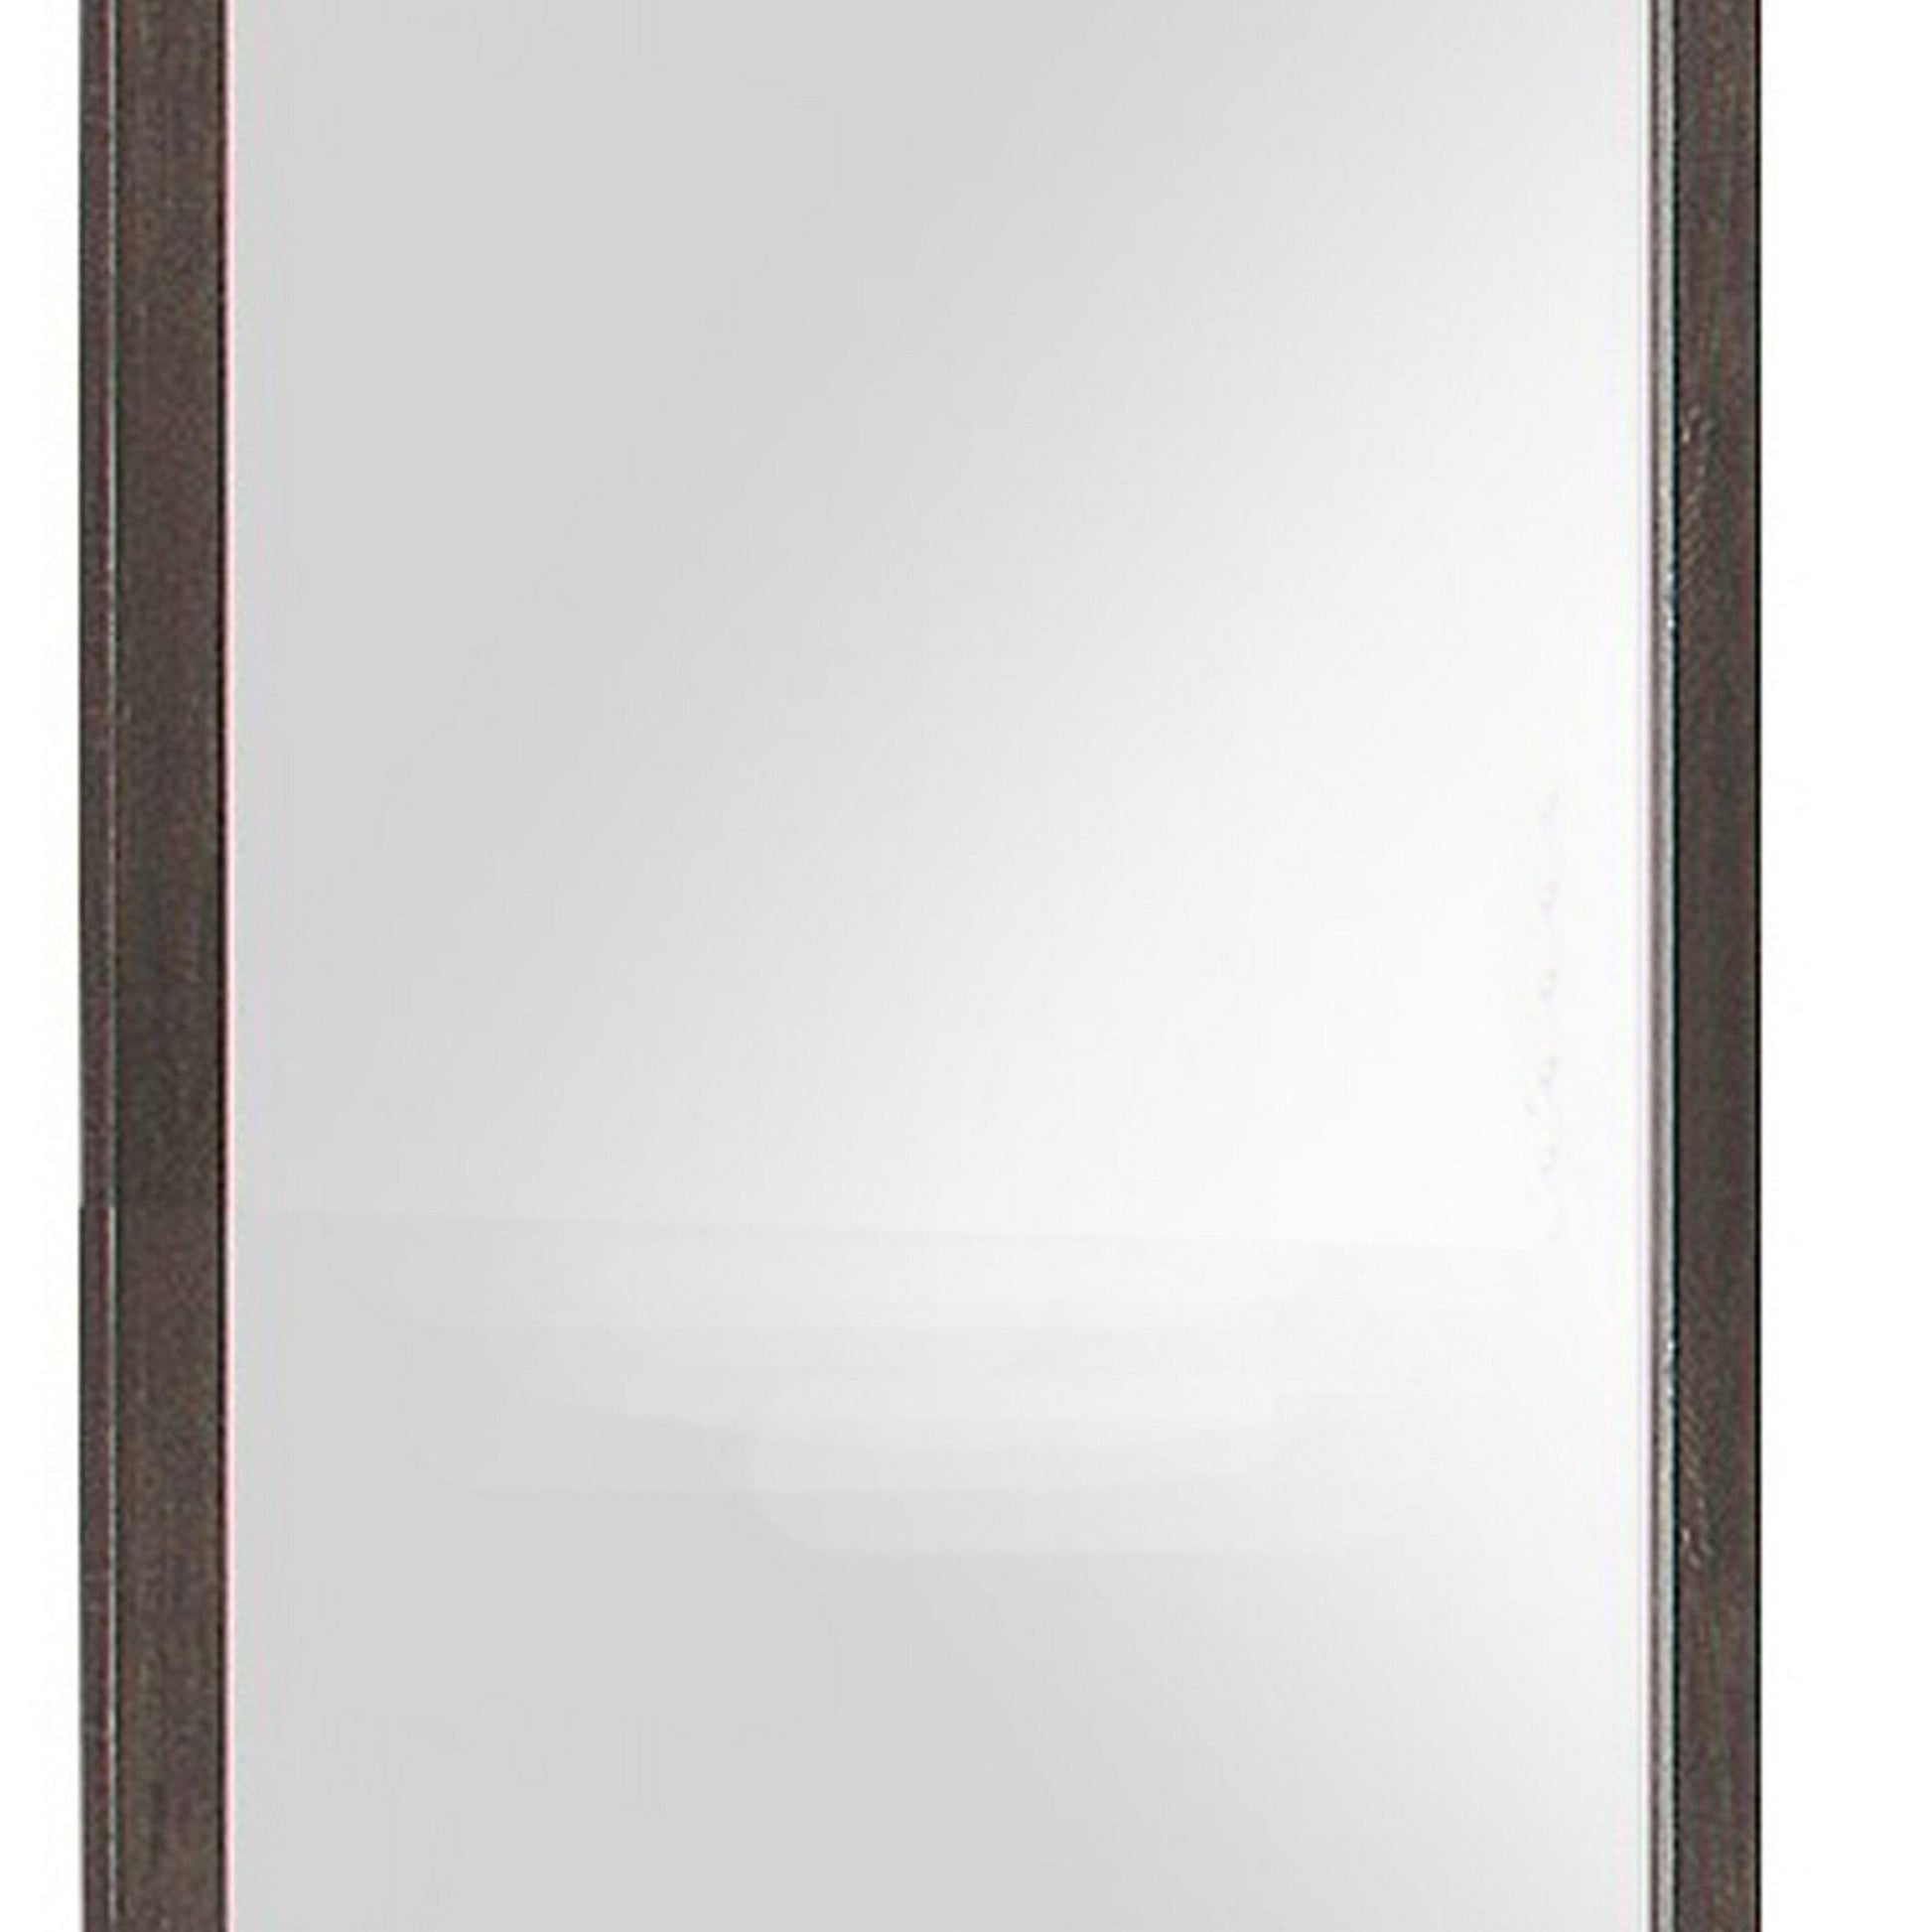 Benzara Weathered Brown Square Shape Mirror with Wooden Frame and Beveled Edges